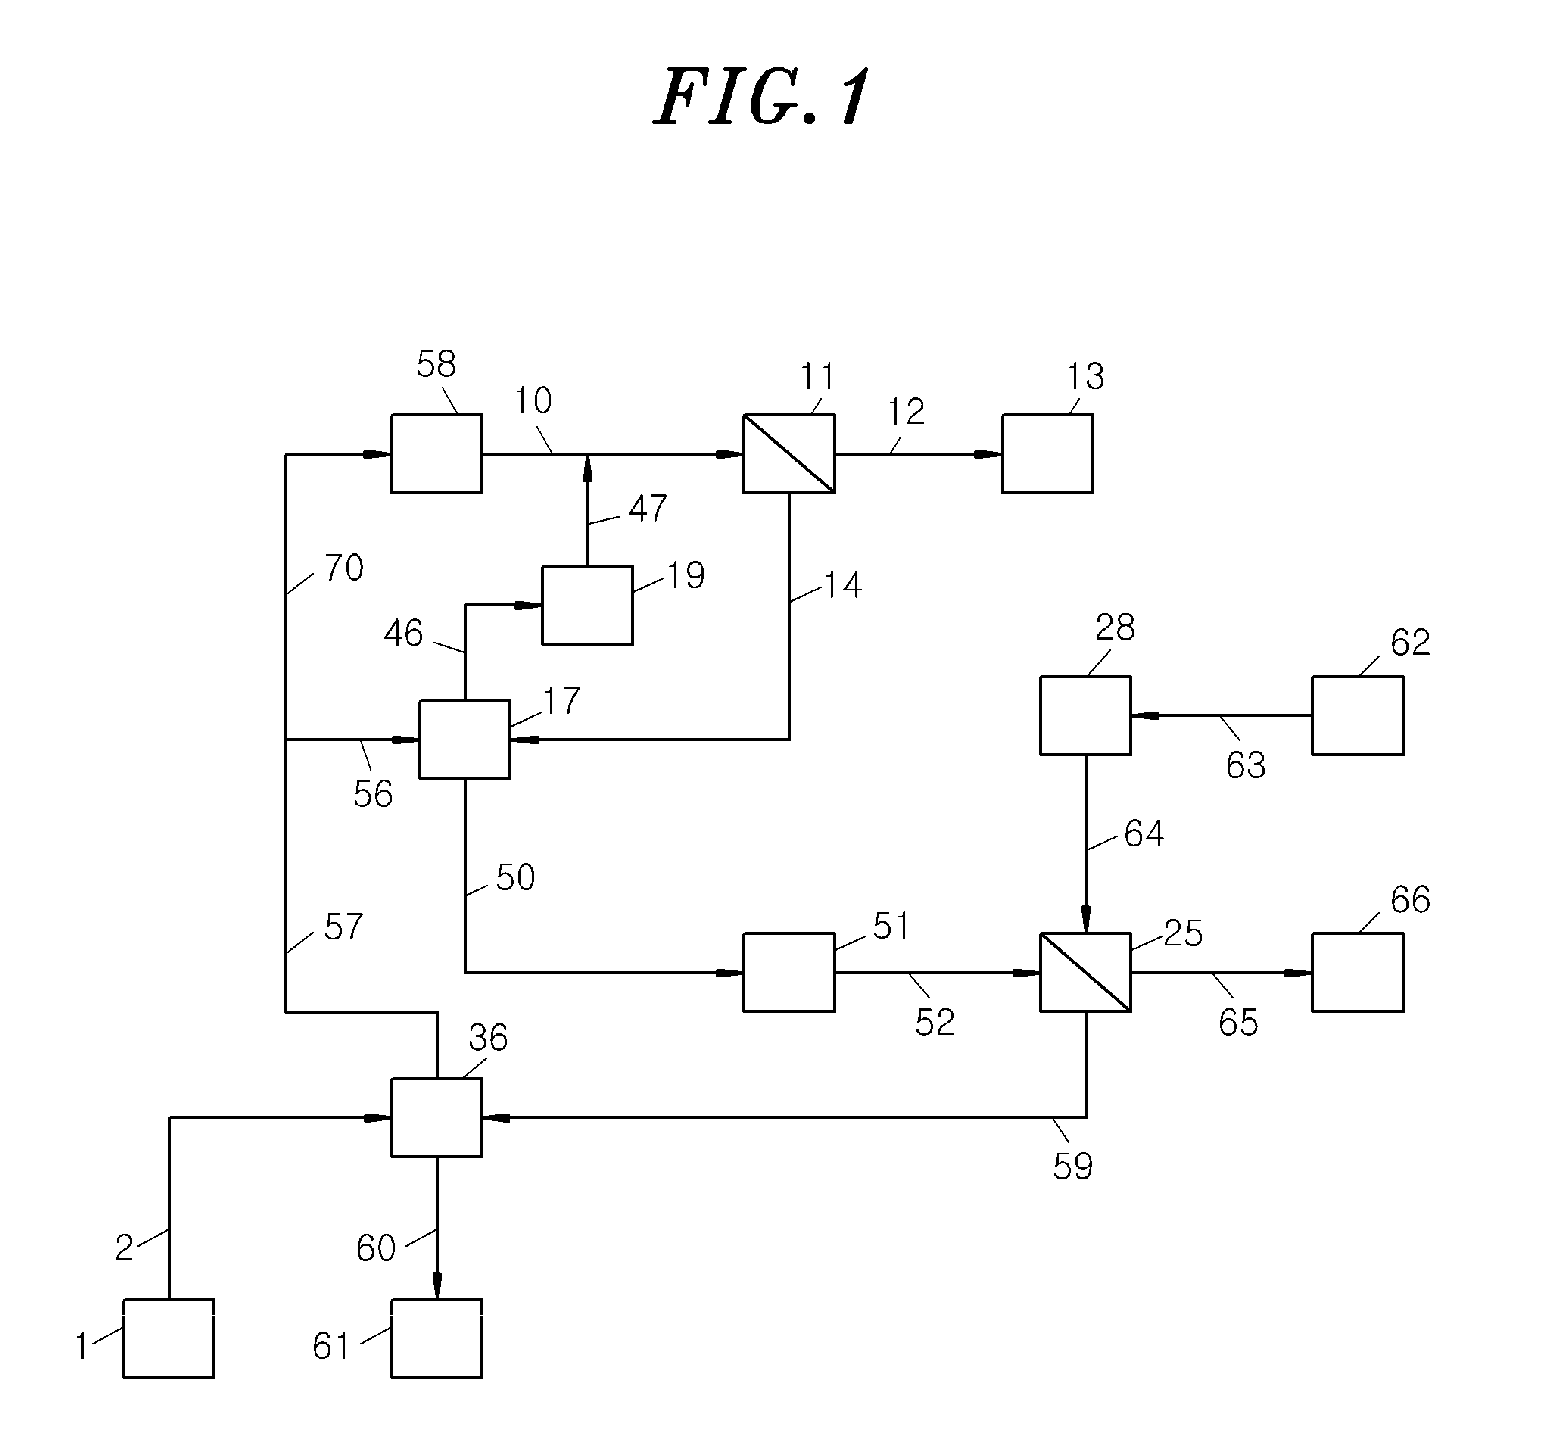 Membrane based desalination apparatus with osmotic energy recovery and membrane based desalination method with osmotic energy recovery